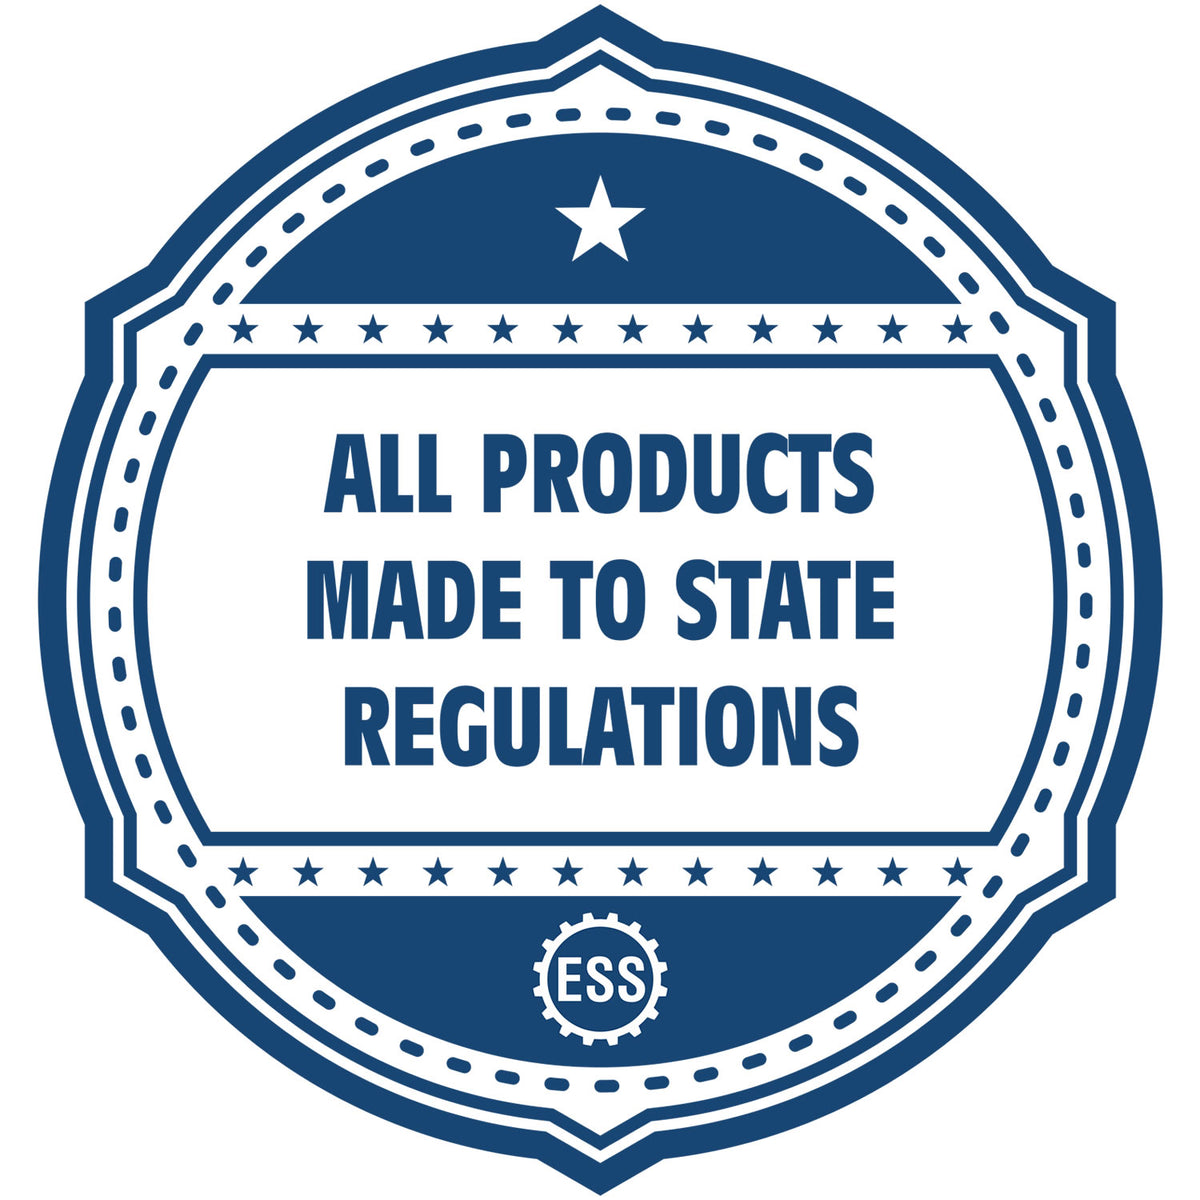 An icon or badge element for the Minnesota Landscape Architectural Seal Stamp showing that this product is made in compliance with state regulations.